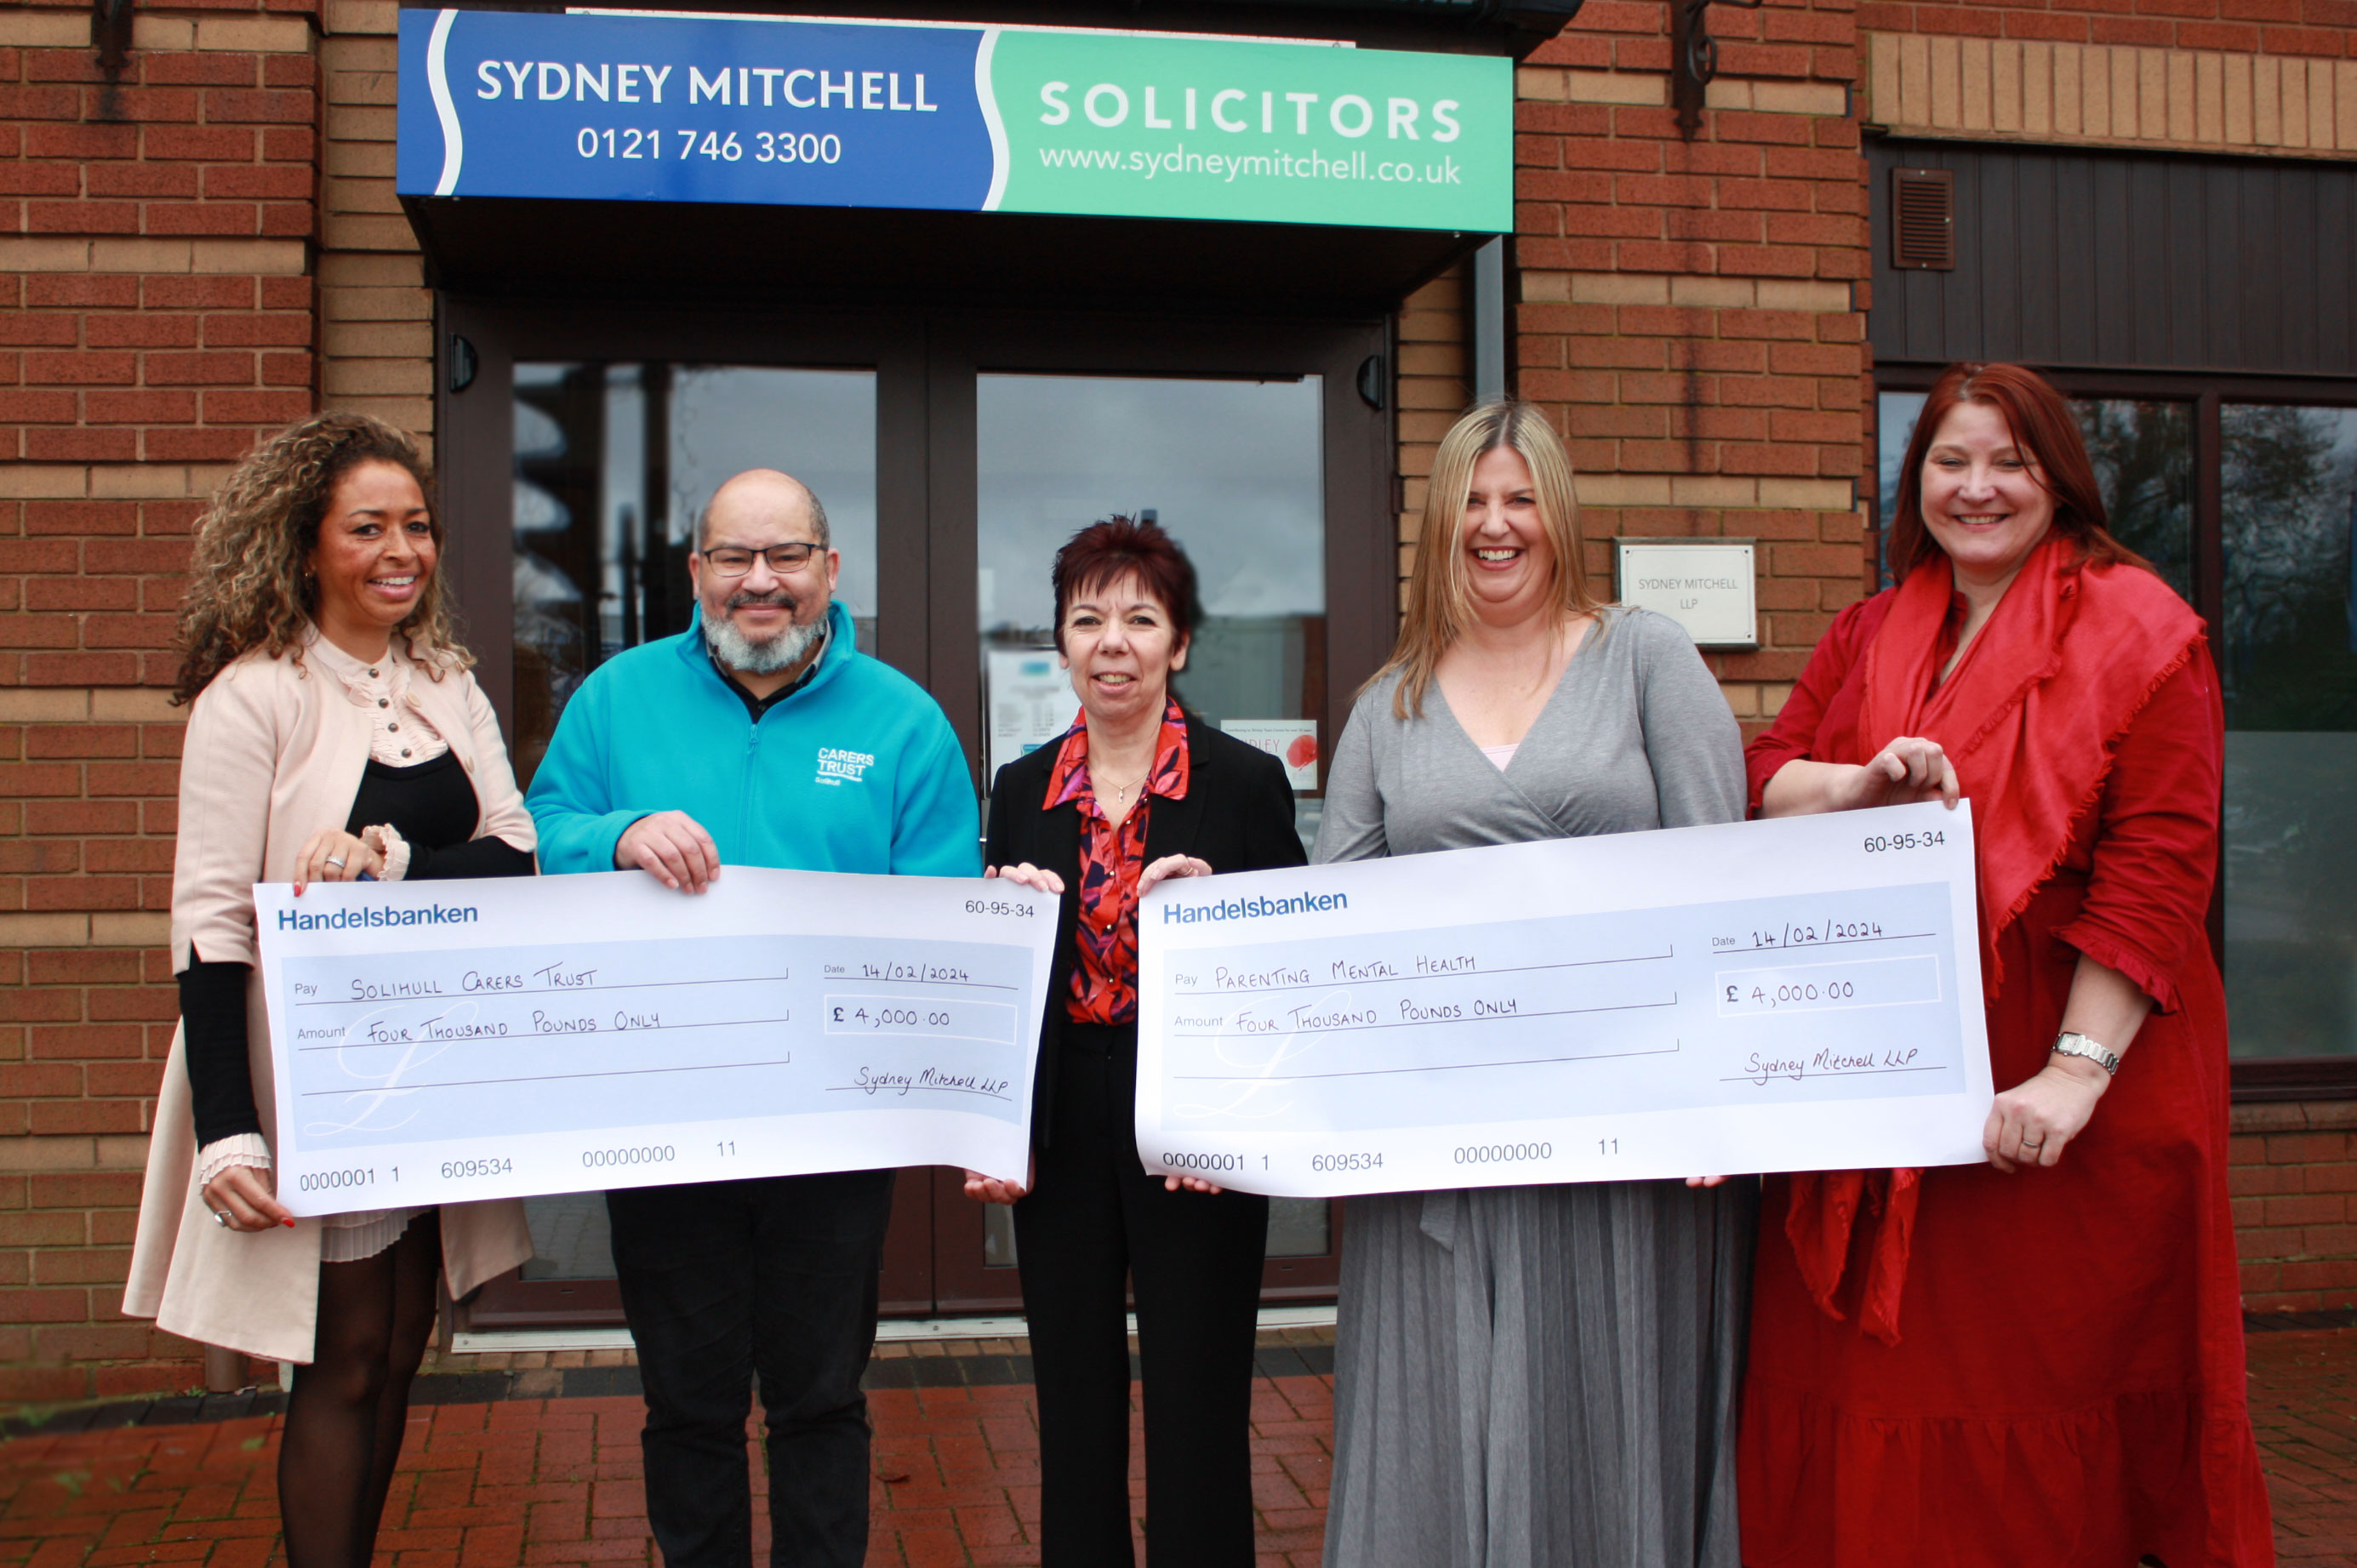 Sydney Mitchell LLP present cheques to Carers Trust Solihull and Parenting Mental Health